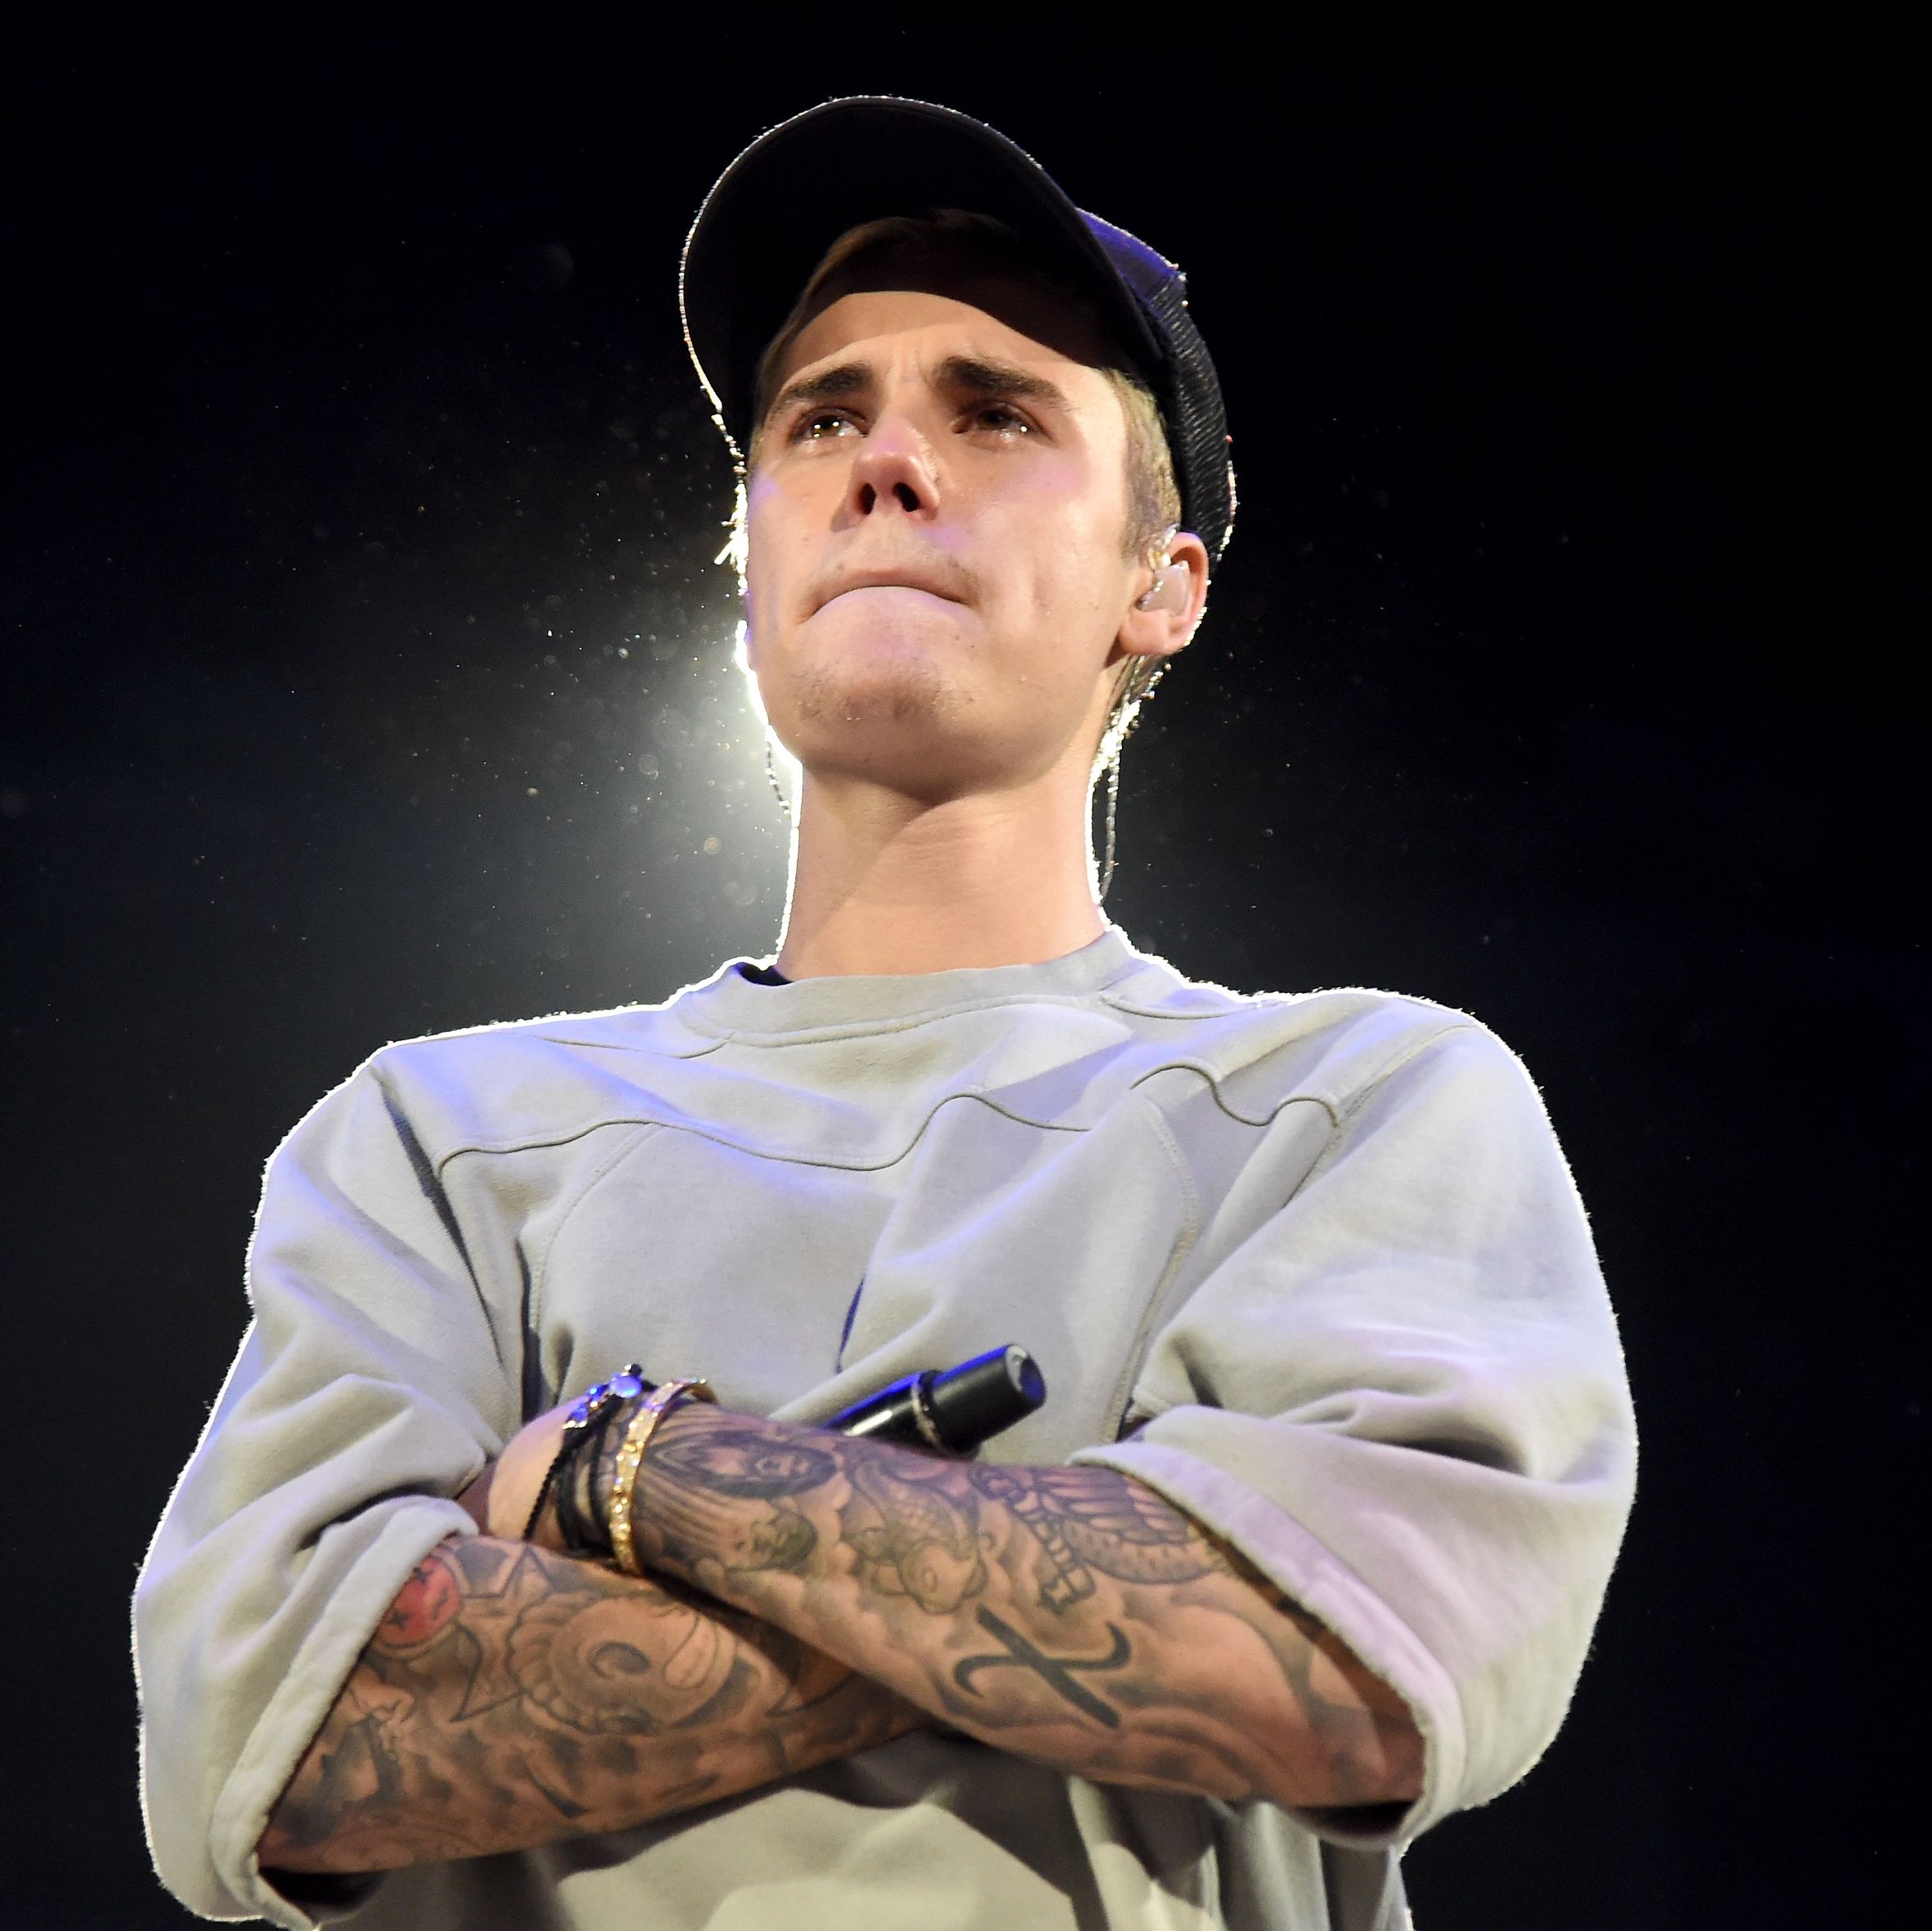 A Justin Bieber Fan Crashed His Performance for a Selfie and Had to Be Removed By Security